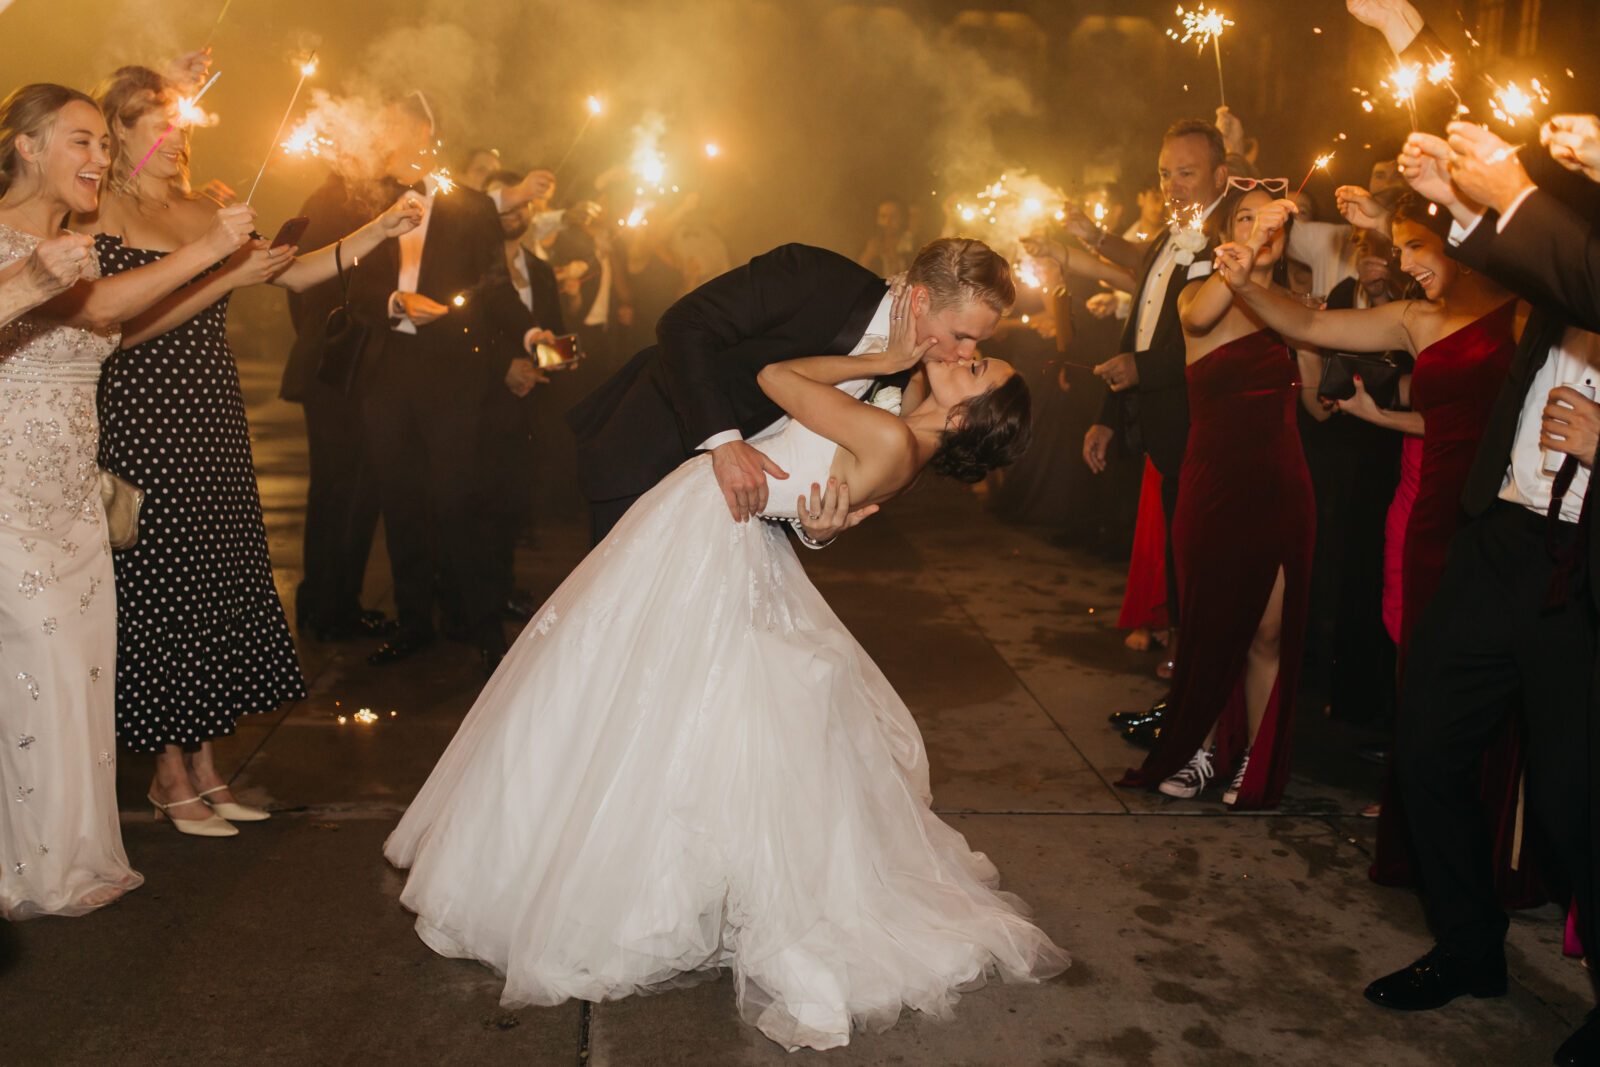 A lovely photo of the bride and groom sharing a kiss and being surrounded by their guests with sprinklers. 